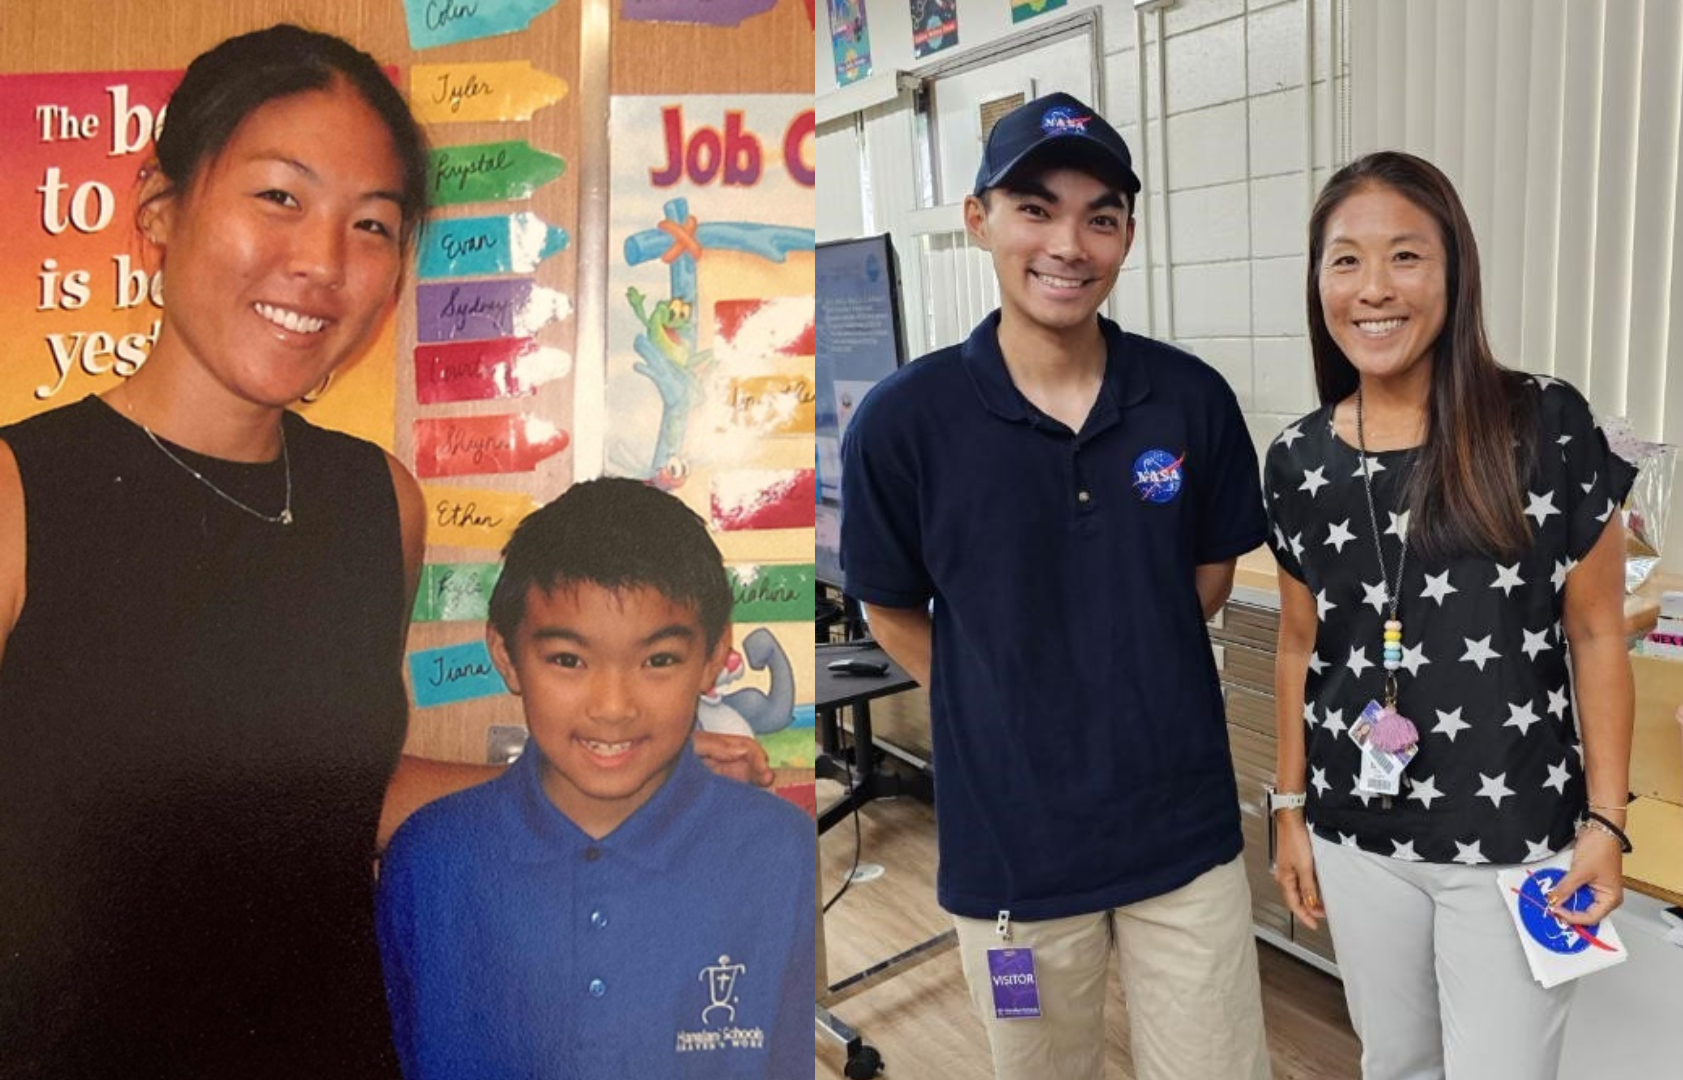 Side-by-side photos of a teacher with a young student and the same teacher with the same student who has grown up.